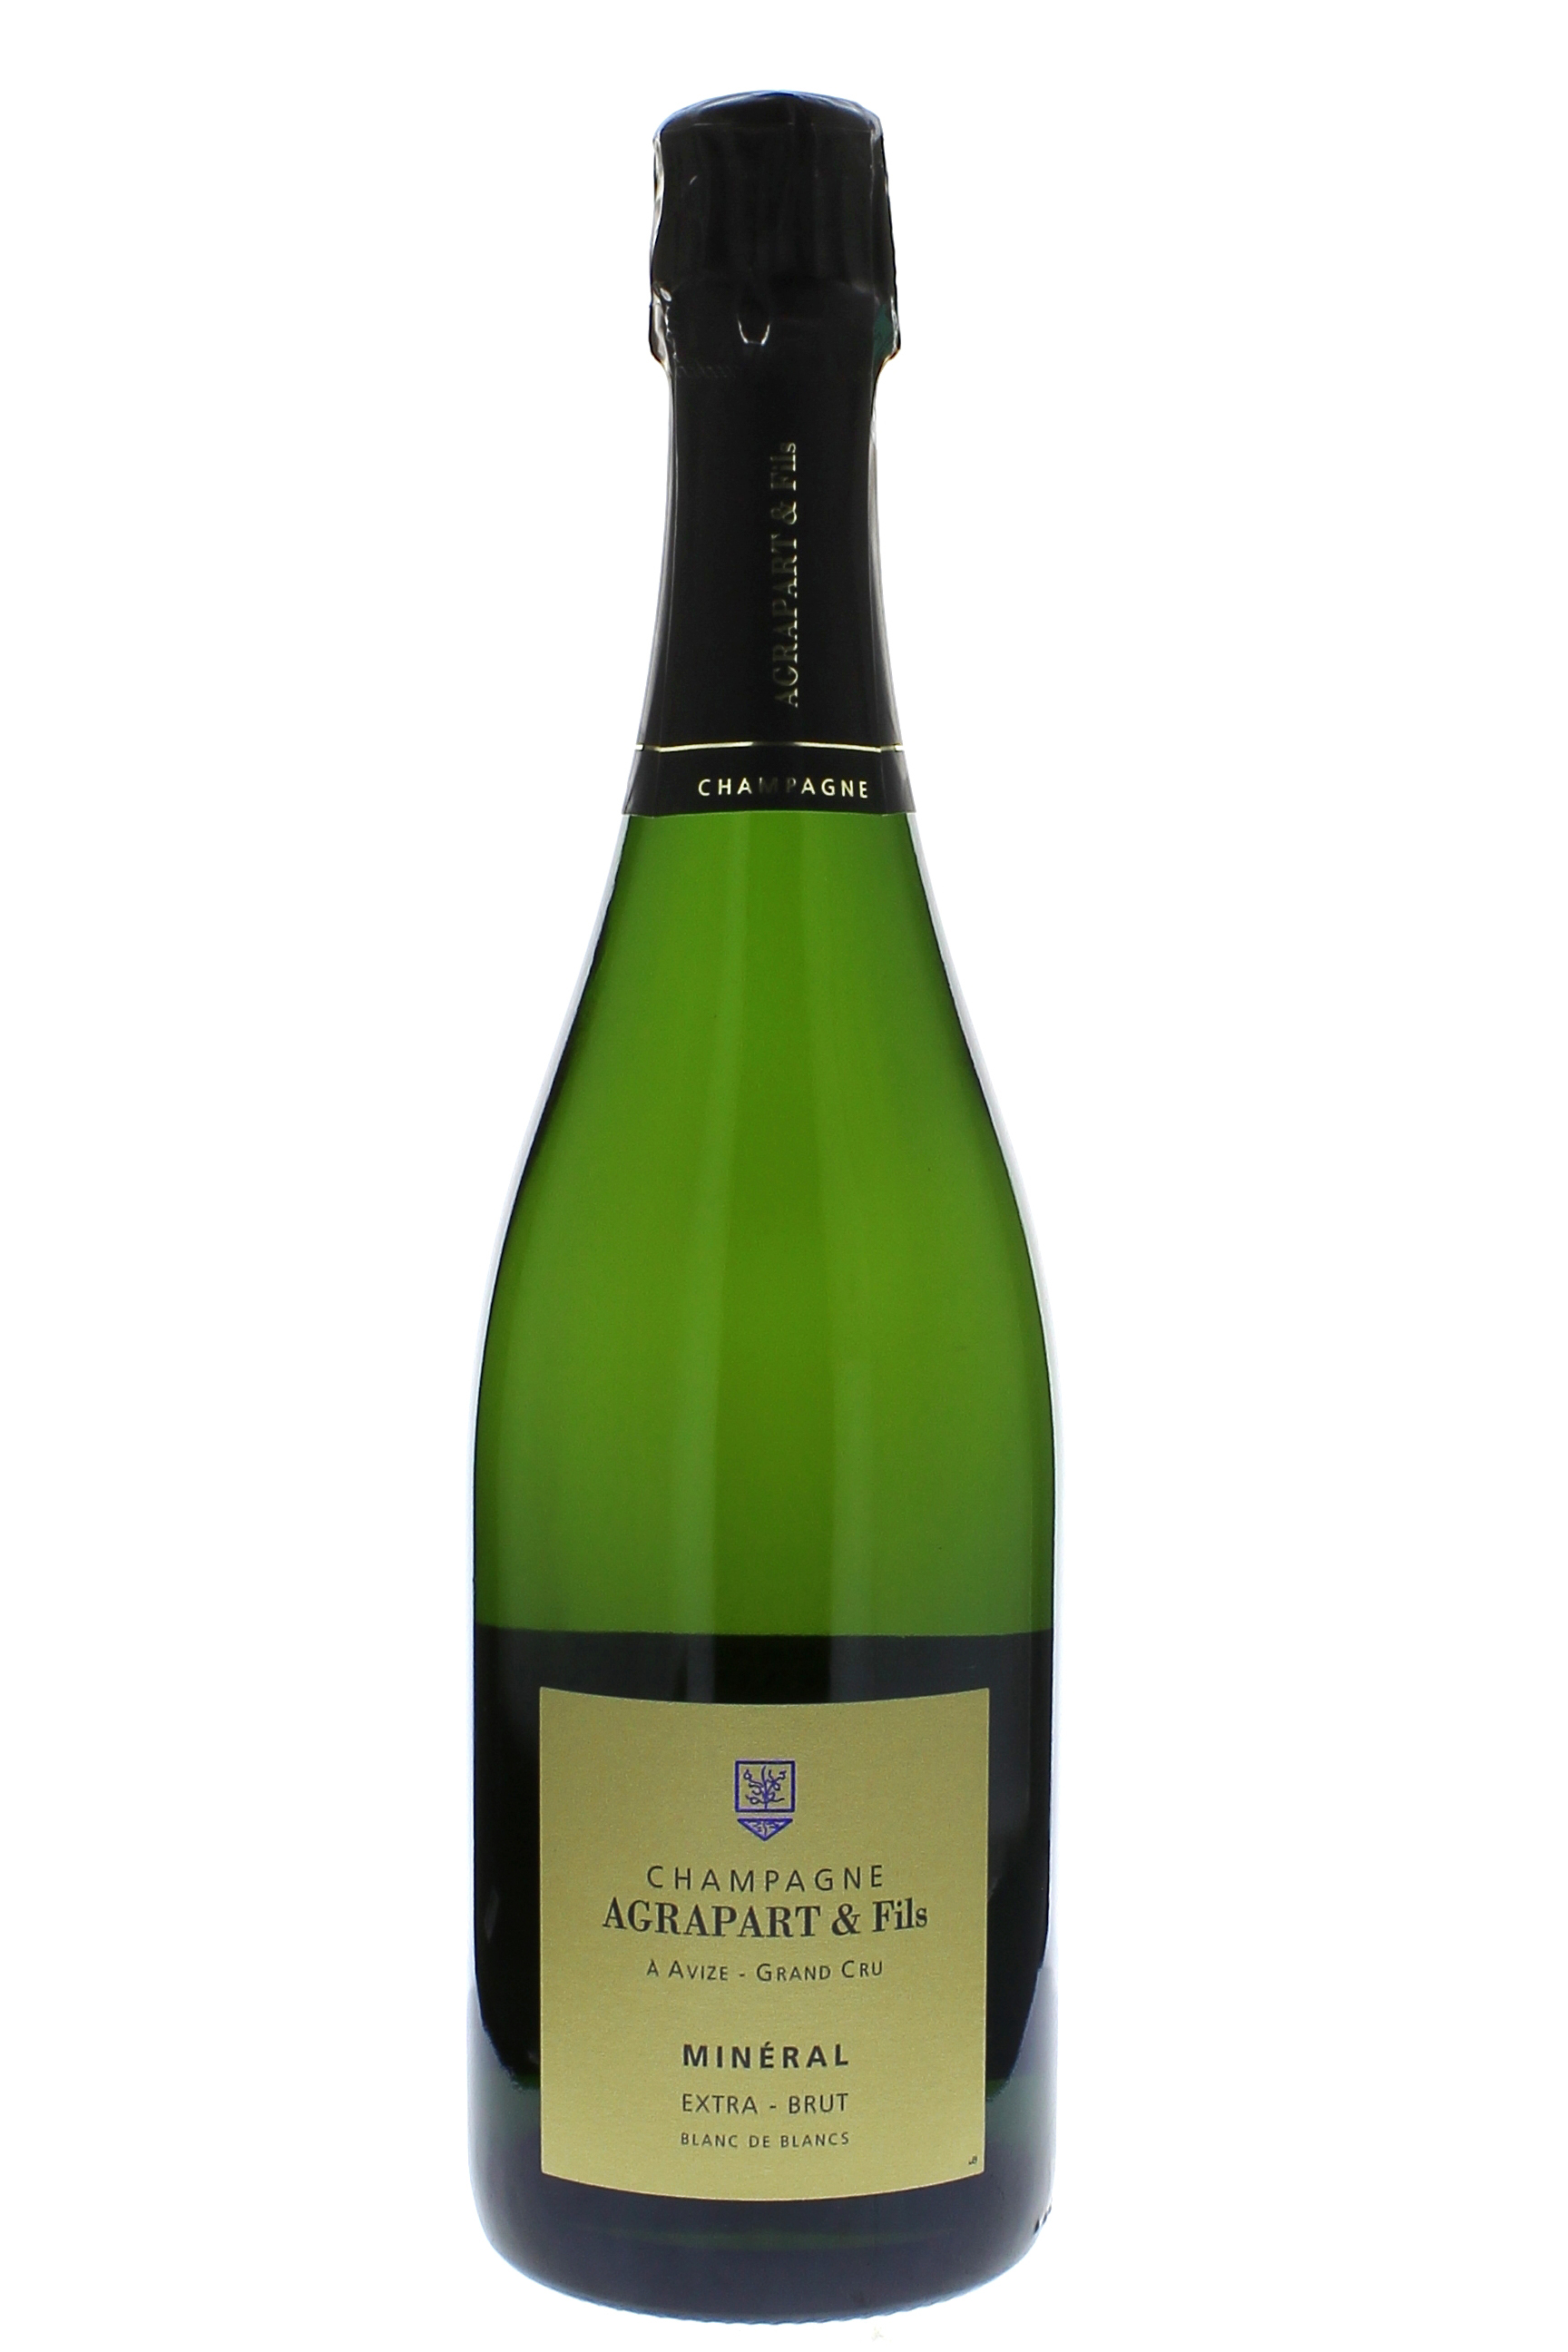 Agrapart  minral 2011  Champagne, Agrapart